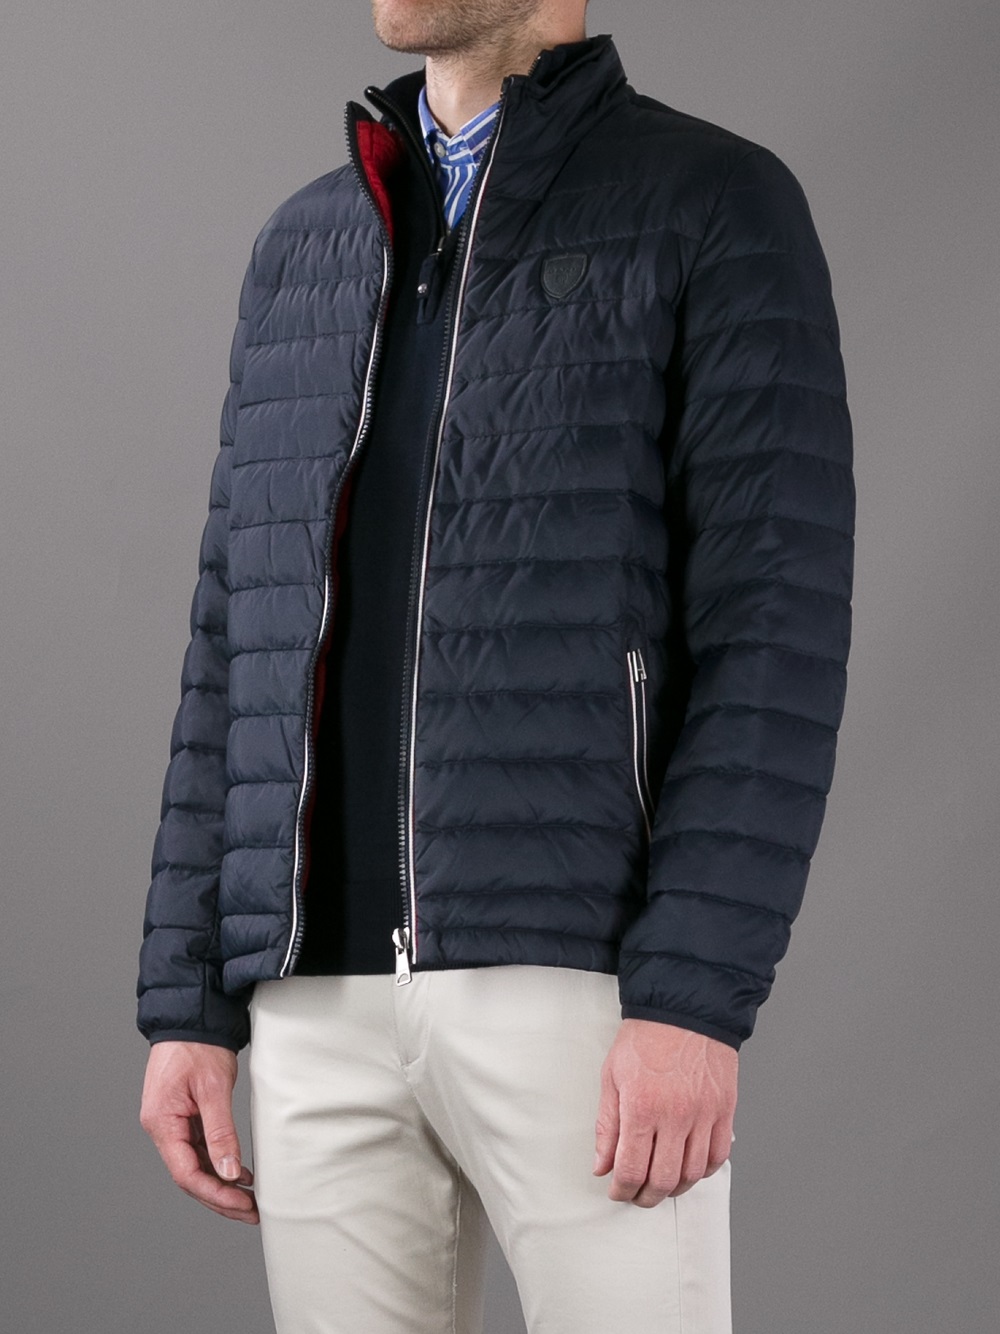 Gant The Down Town Jacket in Blue for Men - Lyst